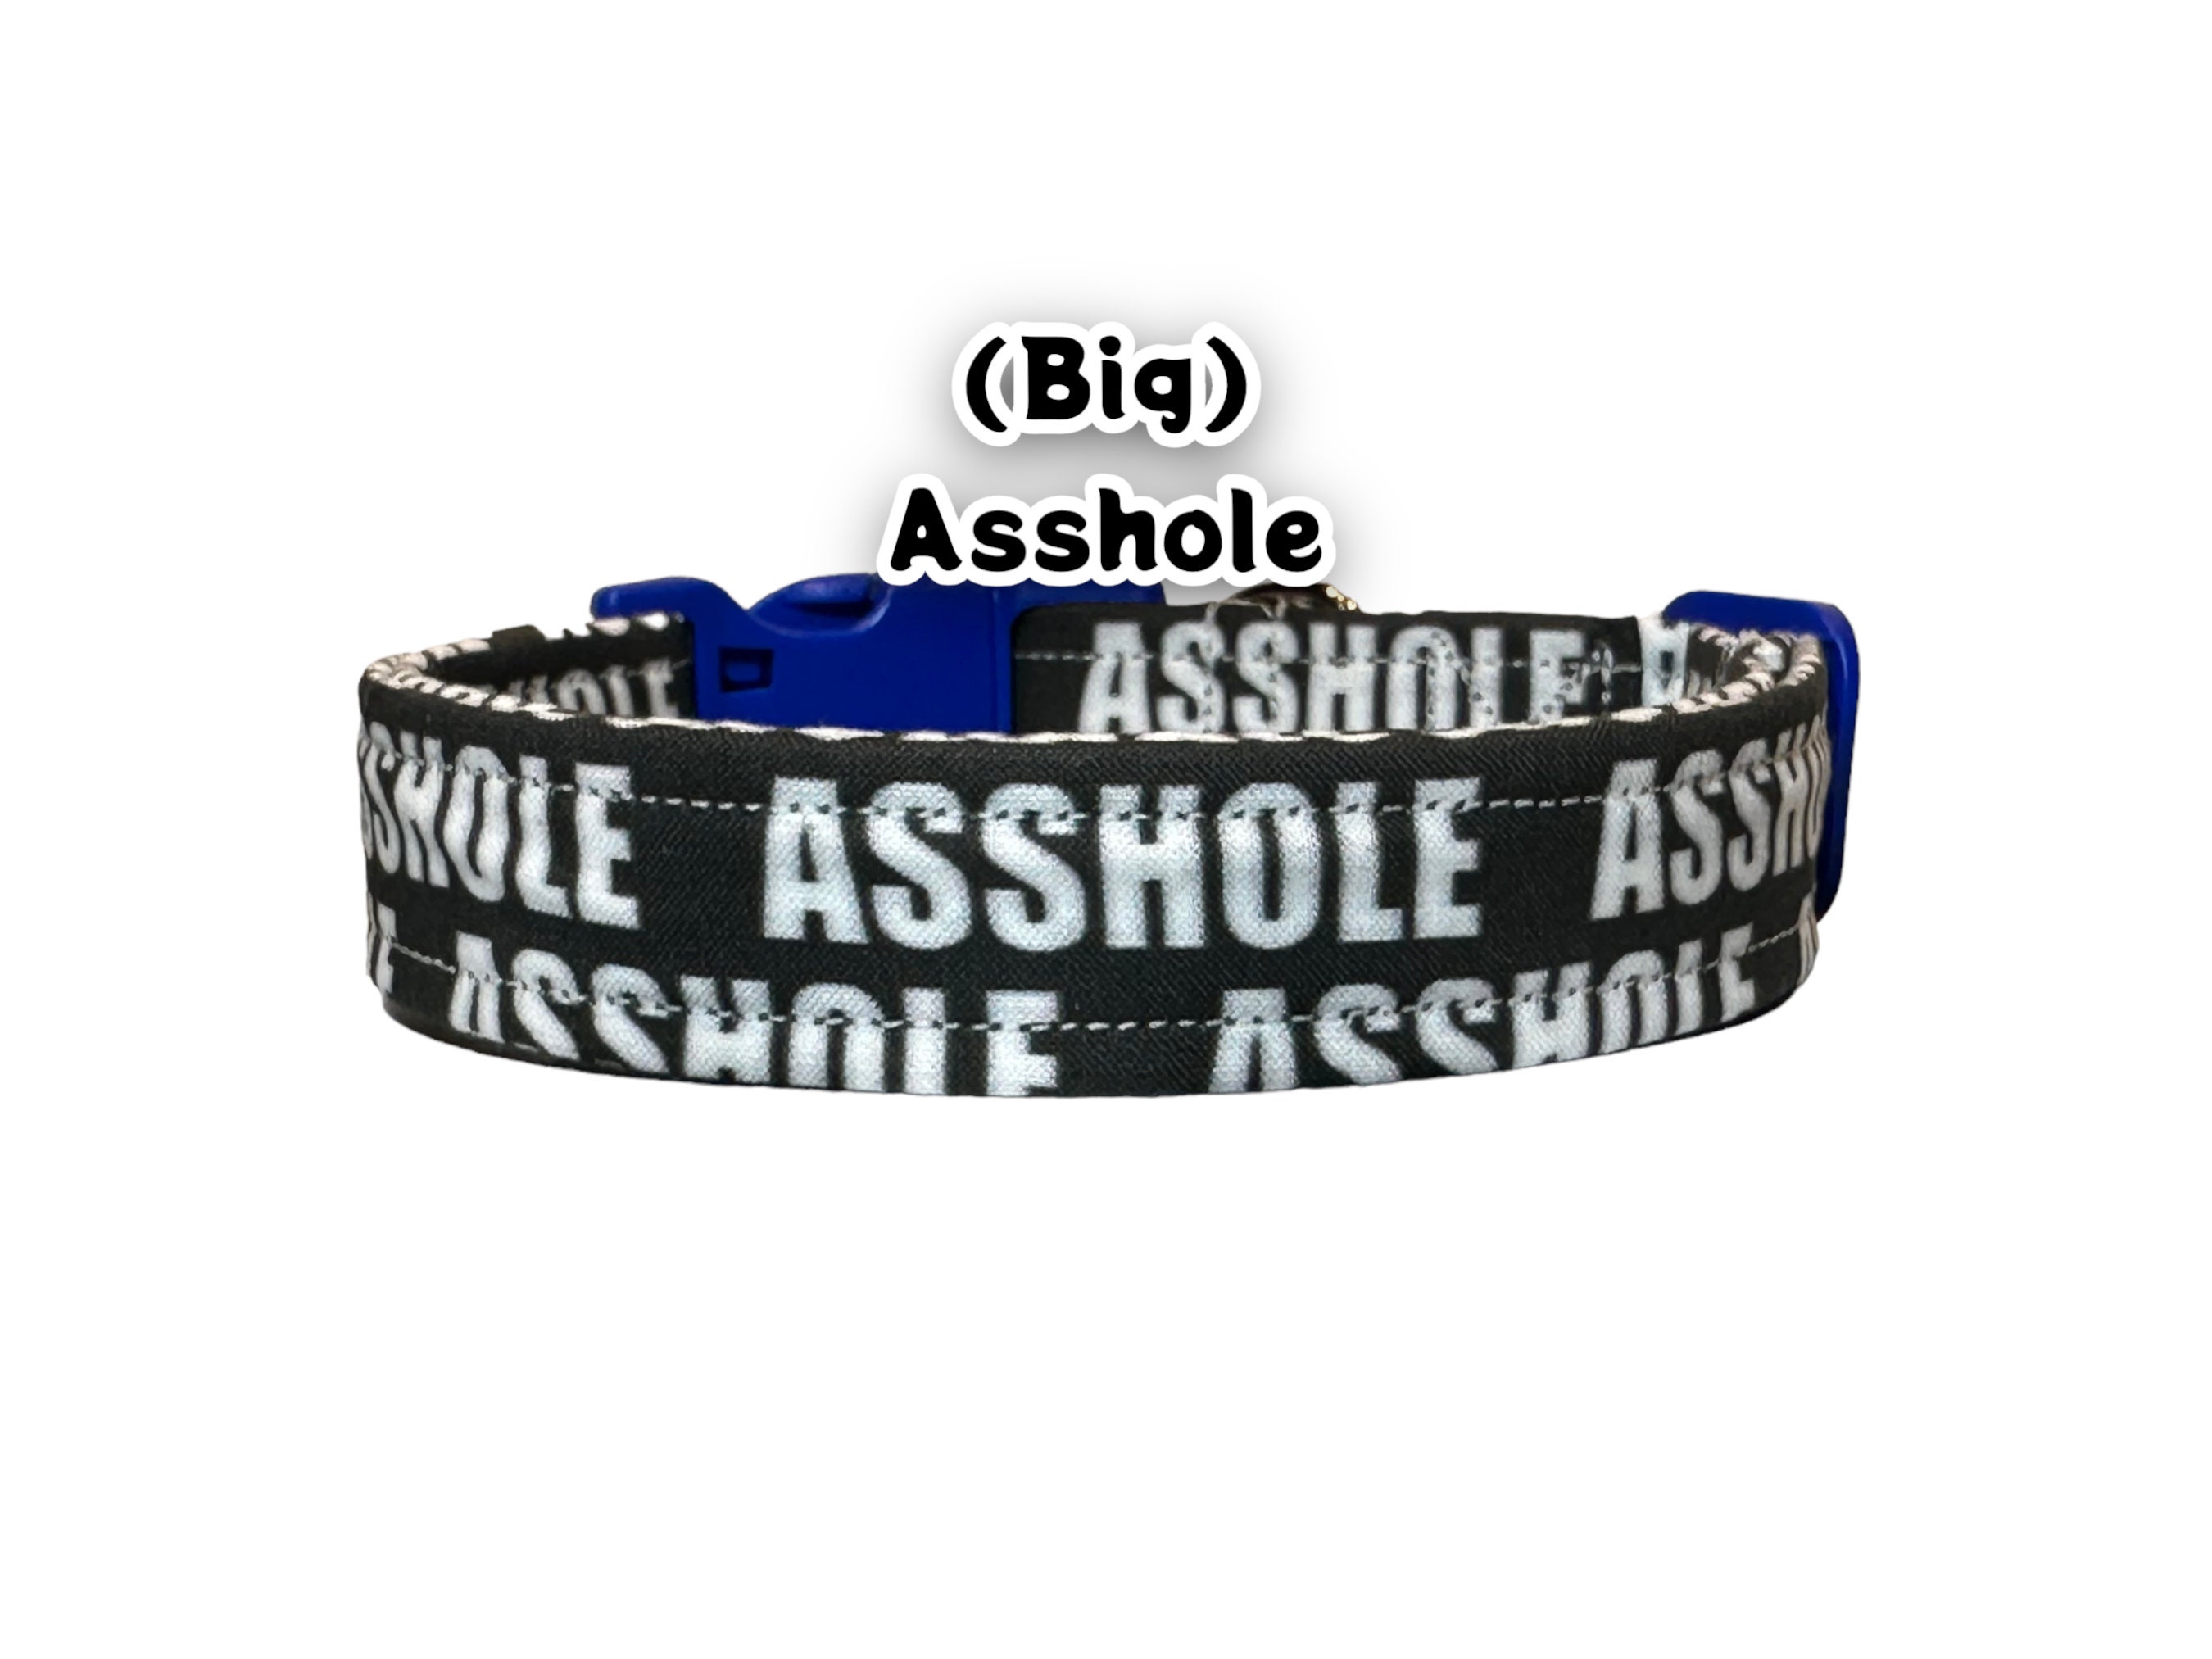 Asshole Dog Collar Funny Dog Collar Bad Words Adult Content 